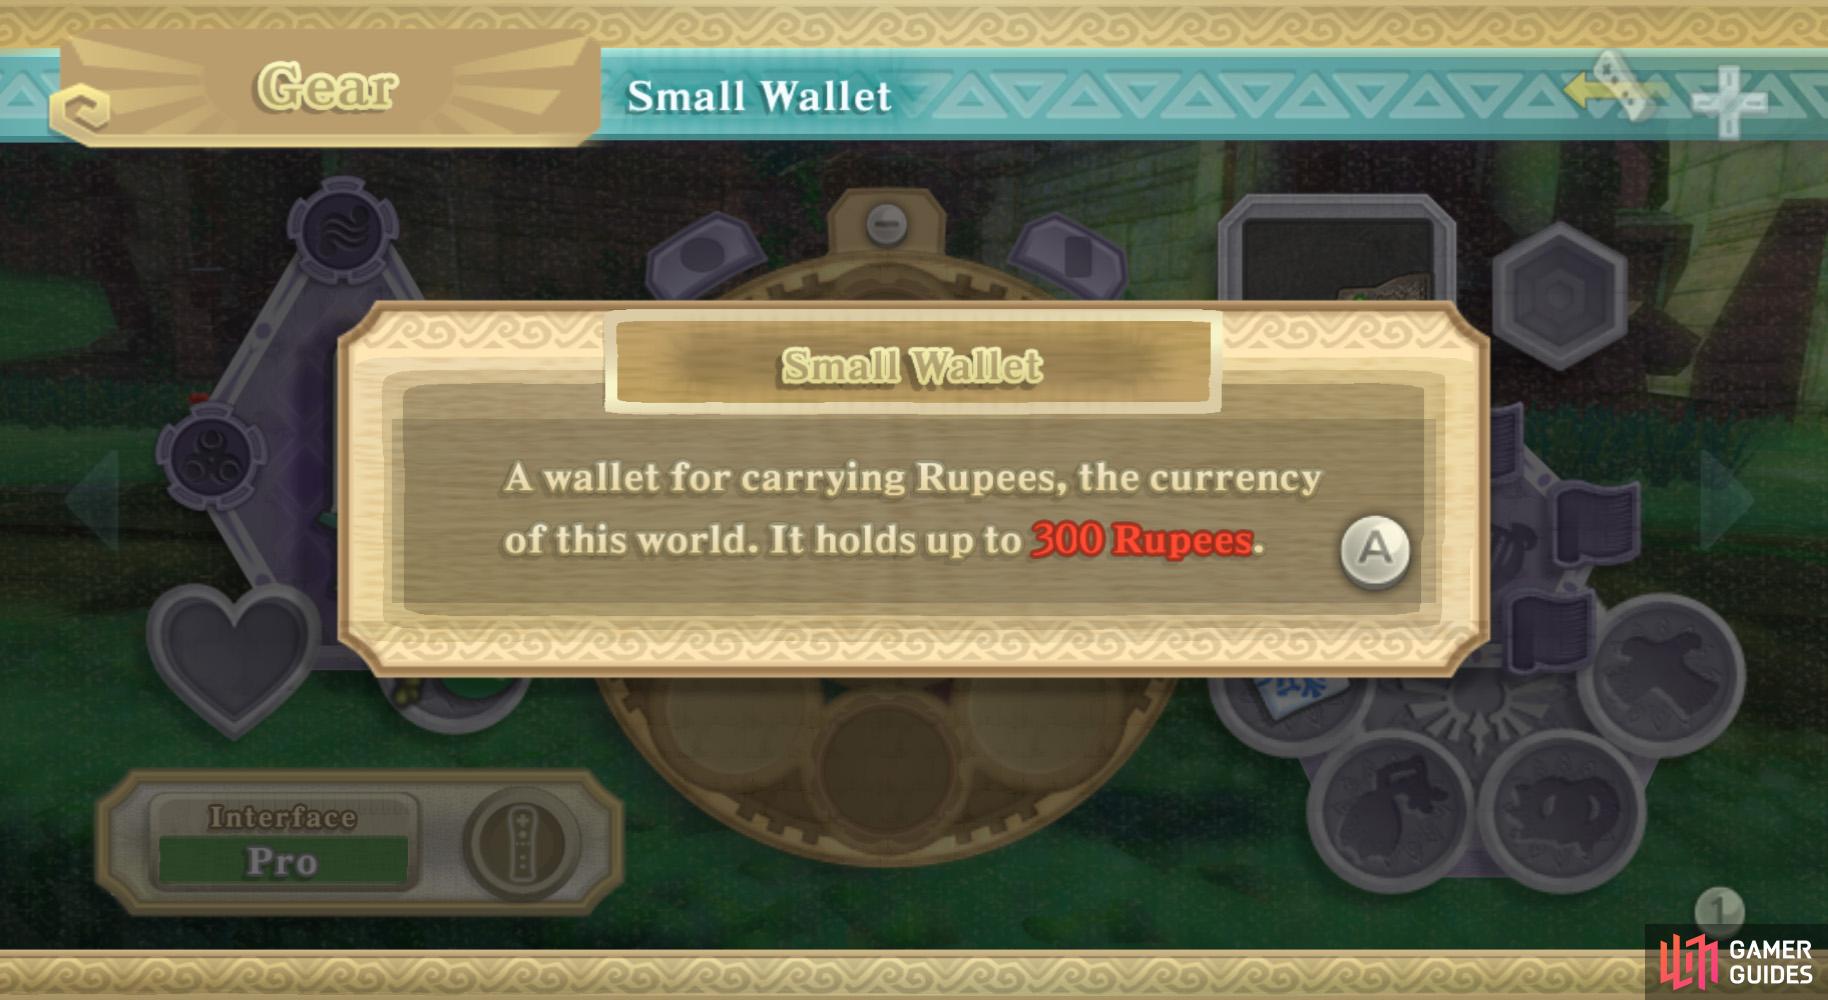 300 Rupees sounds like a lot, but youll reach that amount before you know it.